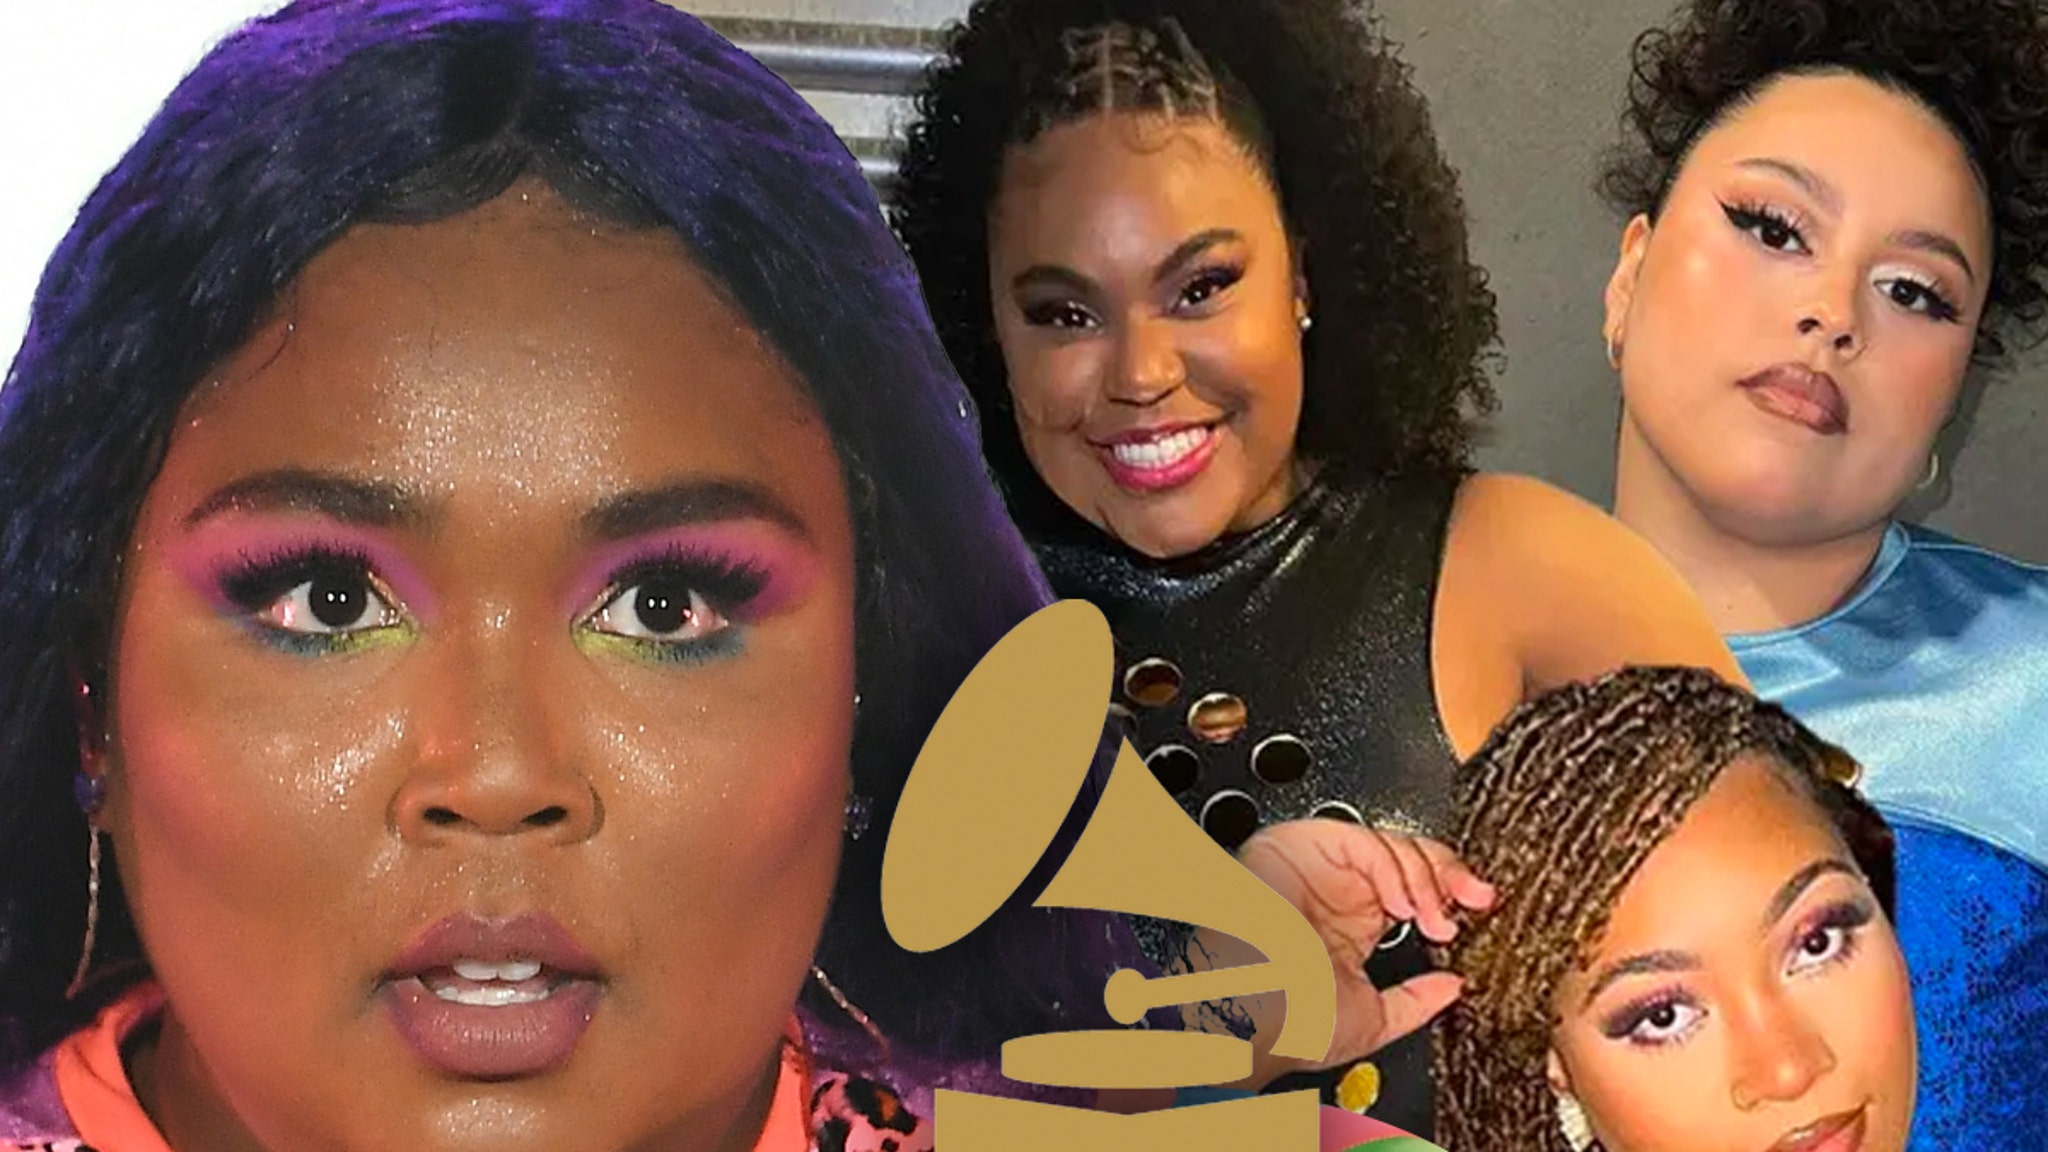 Lizzo’s Grammys Invite Slammed, Accusers’ Attorney Claims Double Standard